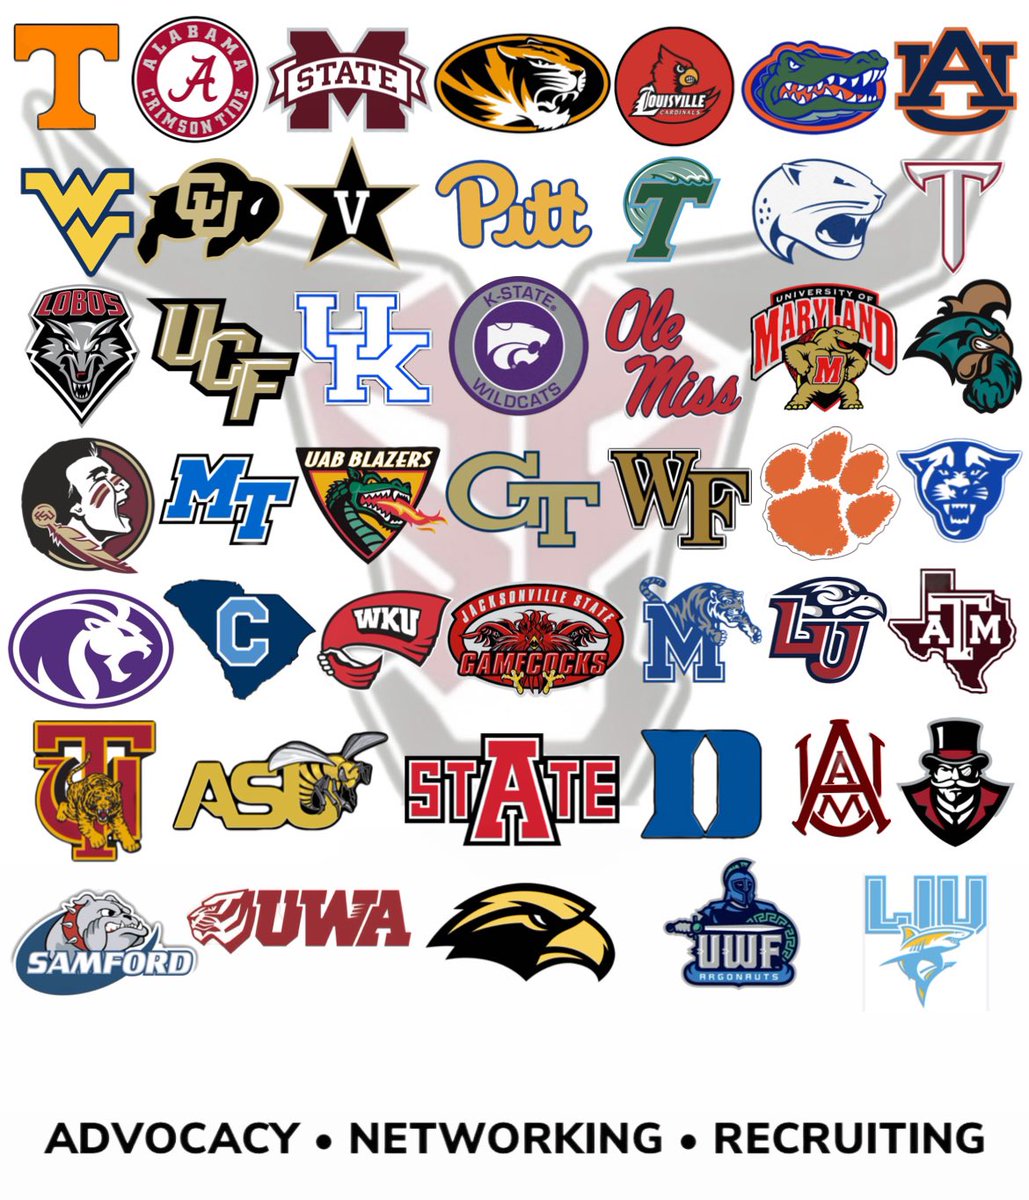 Shout out to all the Universities that have visited our campus and/or offered our student-athletes scholarships! #SpanishFort #Alabama #ToroNation #RecruitTheHill @chasesmith2717 @TomLuginbill @TDARecruiting @Jdsmith31Smith @DexPreps @HallTechSports1 @BenThomasPreps @TheUCReport